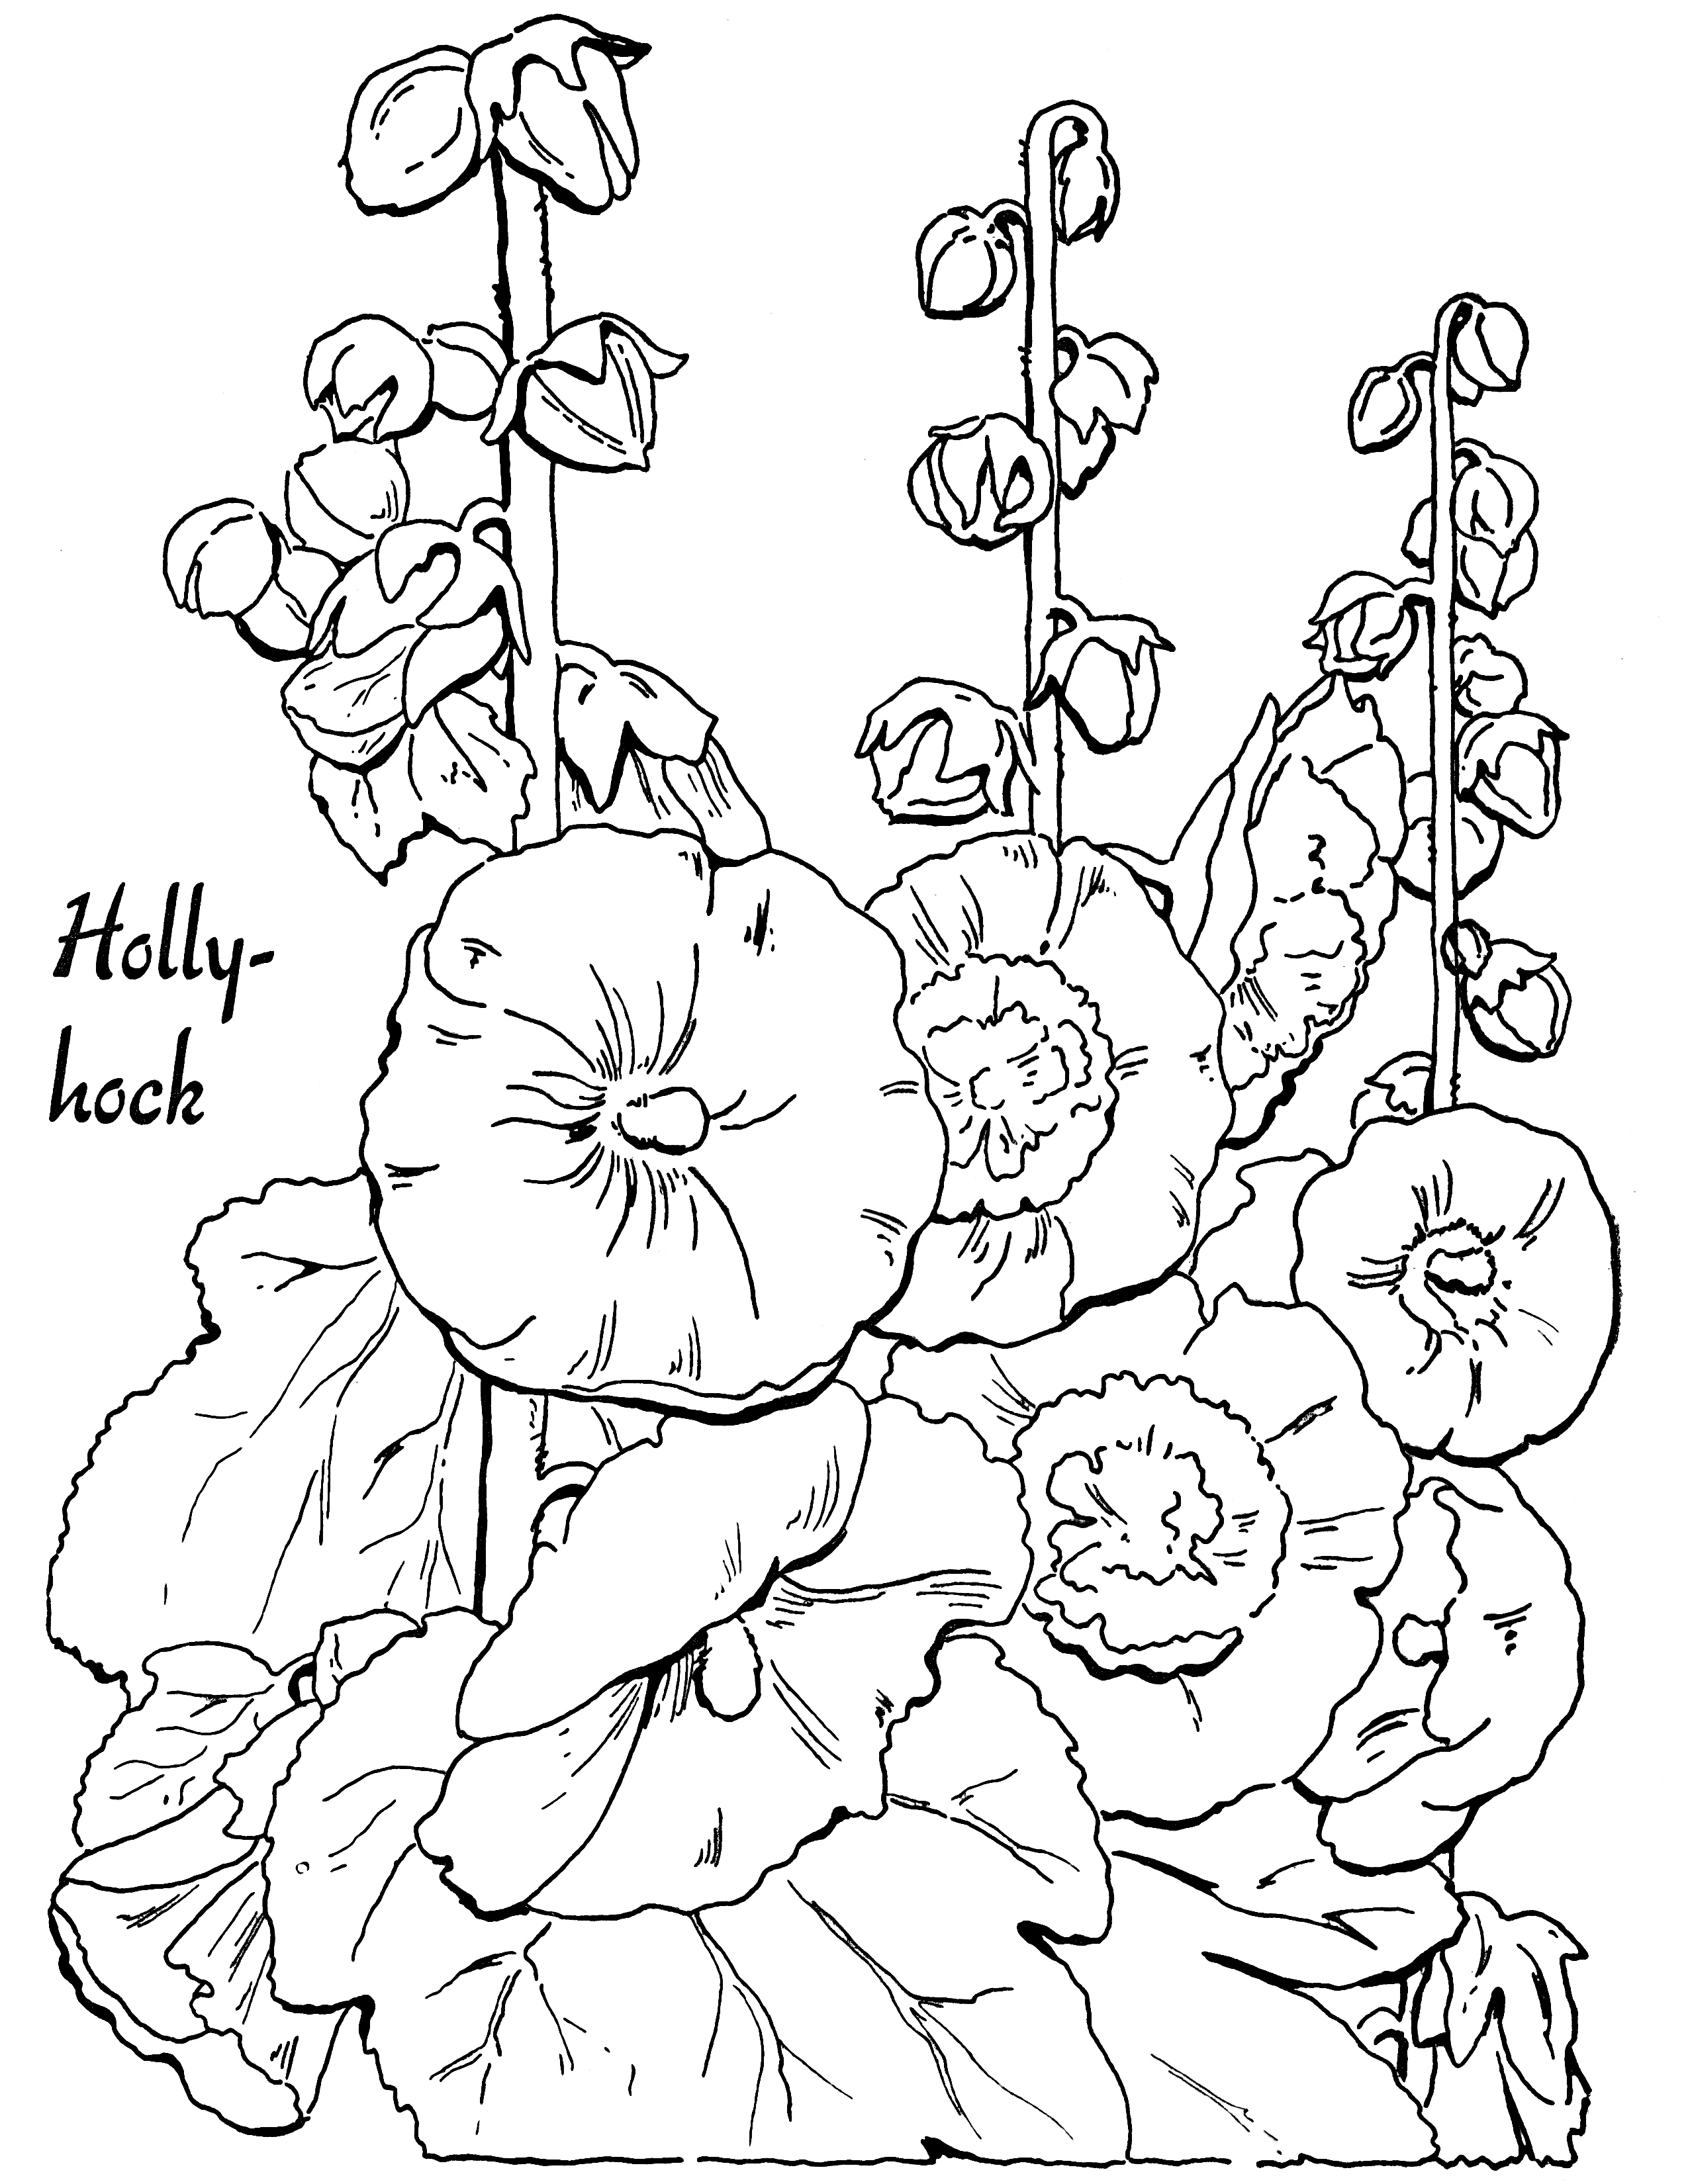 Hollyhocks clipart #8, Download drawings